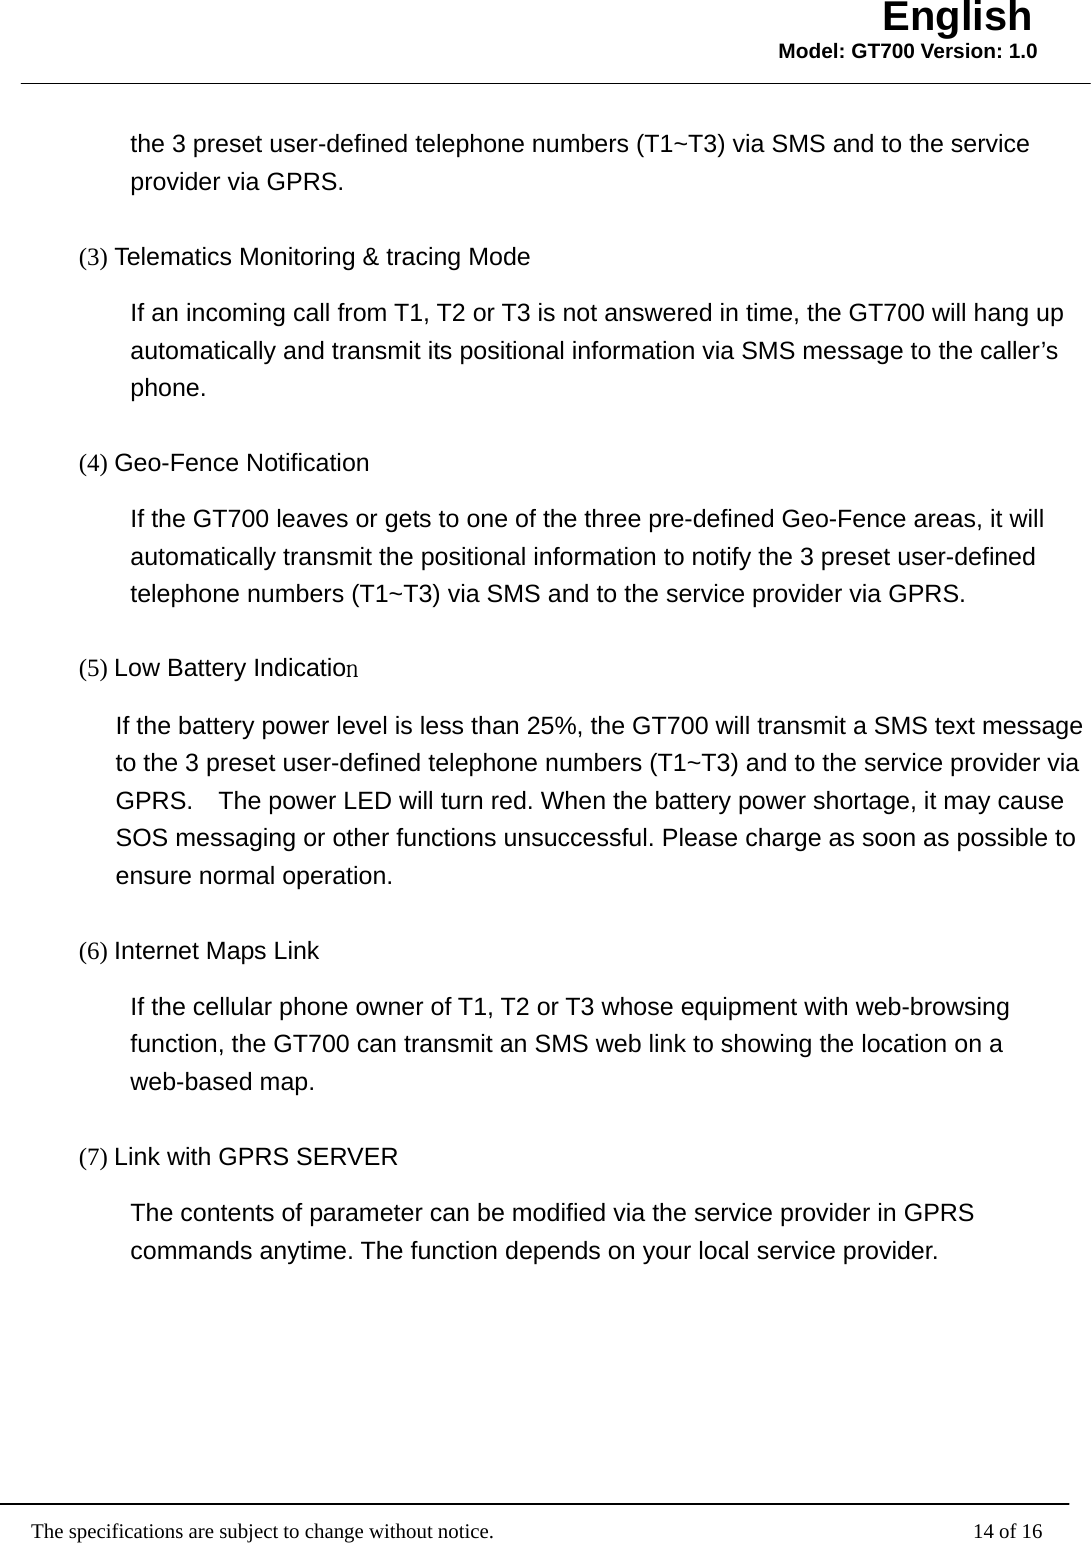                                                   The specifications are subject to change without notice.                                              14 of 16 English Model: GT700 Version: 1.0the 3 preset user-defined telephone numbers (T1~T3) via SMS and to the service provider via GPRS. (3) Telematics Monitoring &amp; tracing Mode If an incoming call from T1, T2 or T3 is not answered in time, the GT700 will hang up automatically and transmit its positional information via SMS message to the caller’s phone. (4) Geo-Fence Notification If the GT700 leaves or gets to one of the three pre-defined Geo-Fence areas, it will automatically transmit the positional information to notify the 3 preset user-defined telephone numbers (T1~T3) via SMS and to the service provider via GPRS. (5) Low Battery Indication If the battery power level is less than 25%, the GT700 will transmit a SMS text message to the 3 preset user-defined telephone numbers (T1~T3) and to the service provider via GPRS.    The power LED will turn red. When the battery power shortage, it may cause SOS messaging or other functions unsuccessful. Please charge as soon as possible to ensure normal operation. (6) Internet Maps Link If the cellular phone owner of T1, T2 or T3 whose equipment with web-browsing function, the GT700 can transmit an SMS web link to showing the location on a web-based map. (7) Link with GPRS SERVER The contents of parameter can be modified via the service provider in GPRS commands anytime. The function depends on your local service provider.   